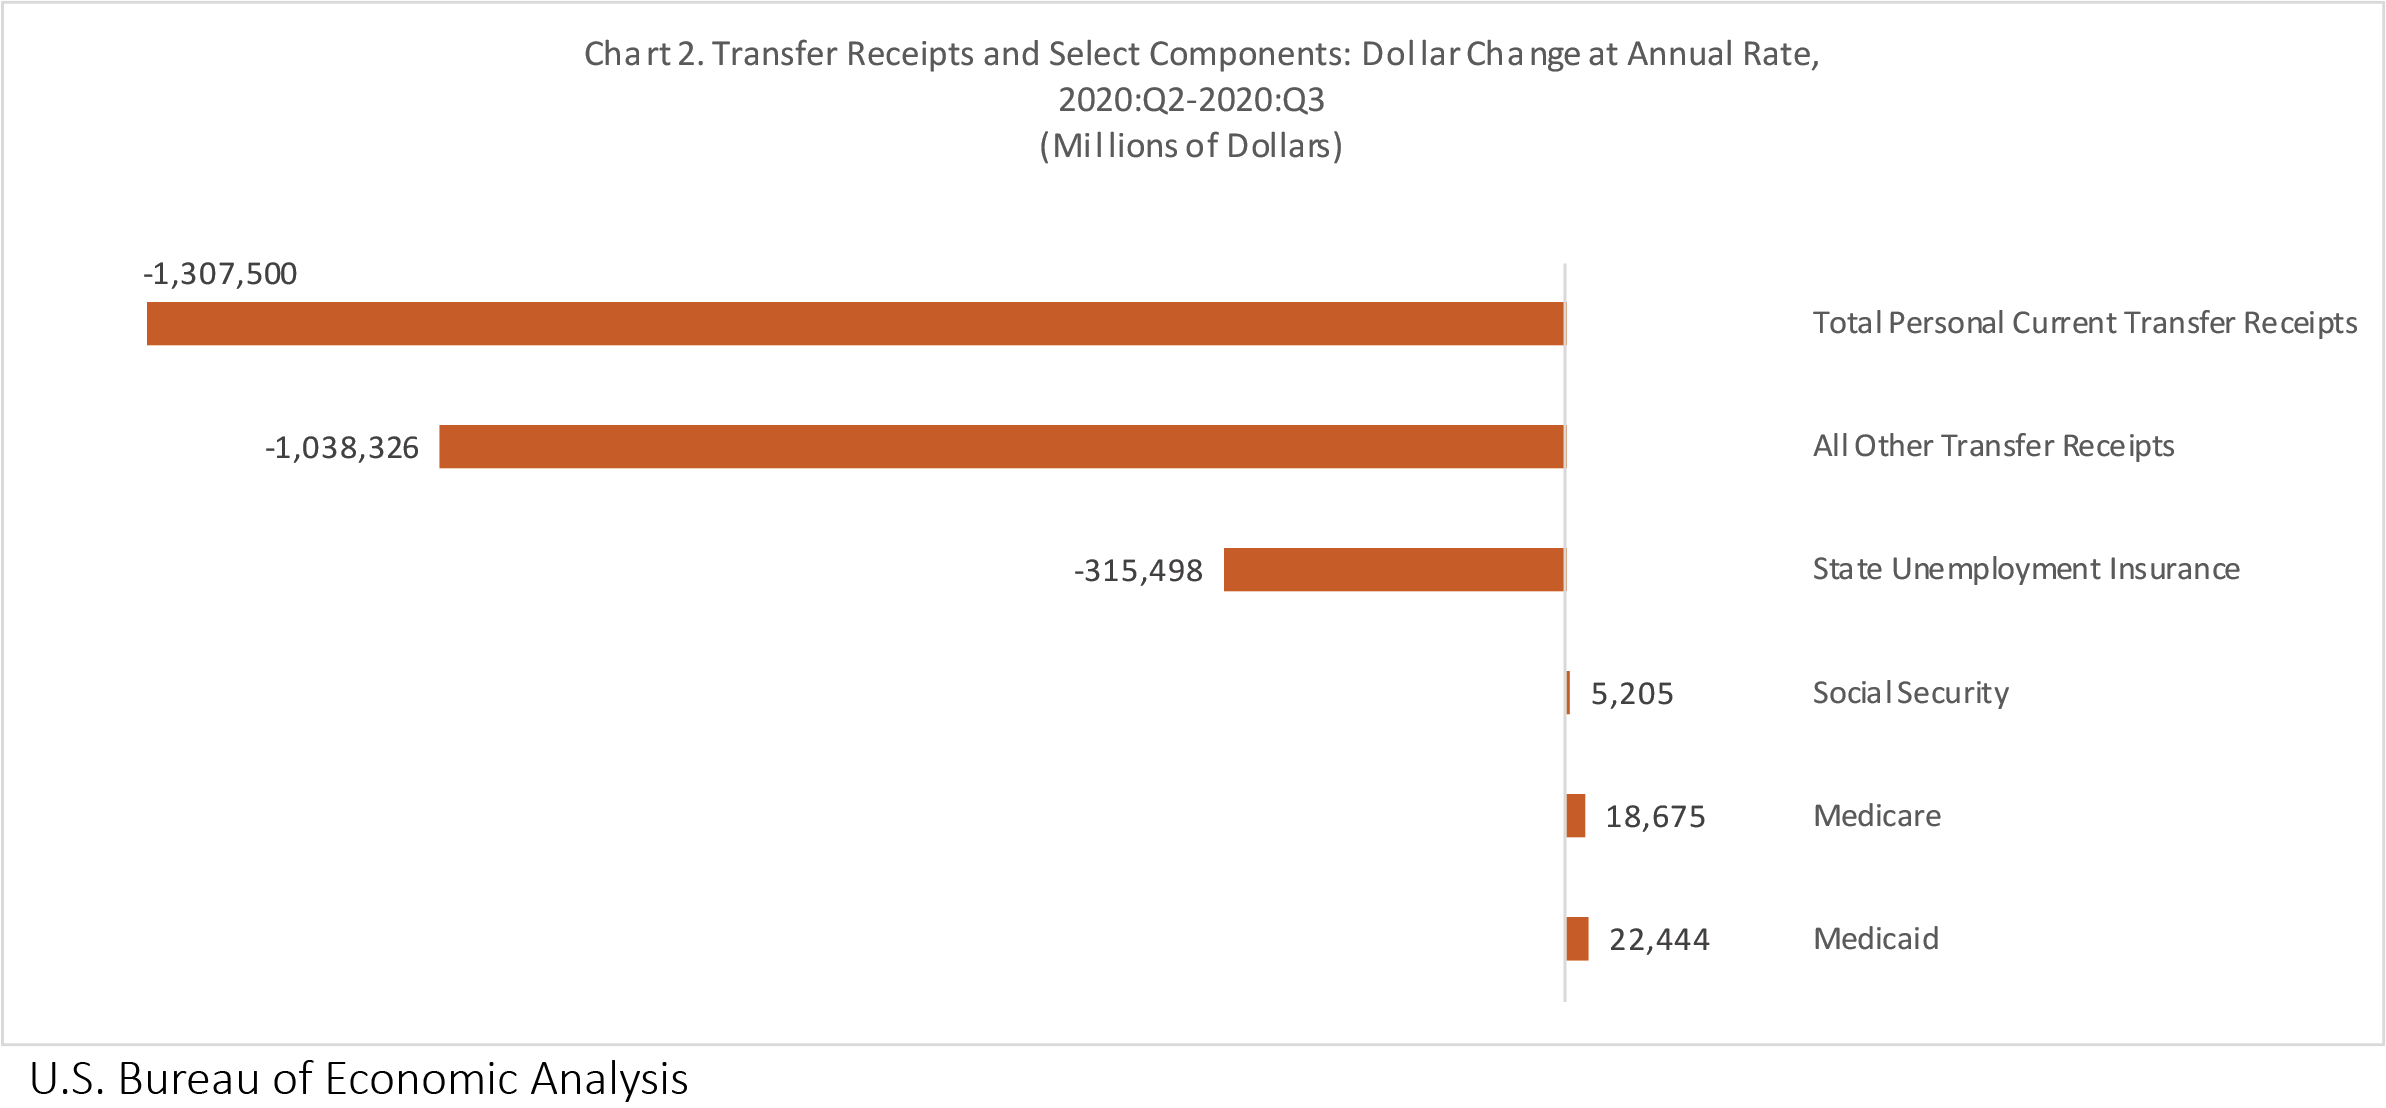 Chart 2. Dollar Change in Transfer Receipts and Select Components, US: 2020 Q2-Q3